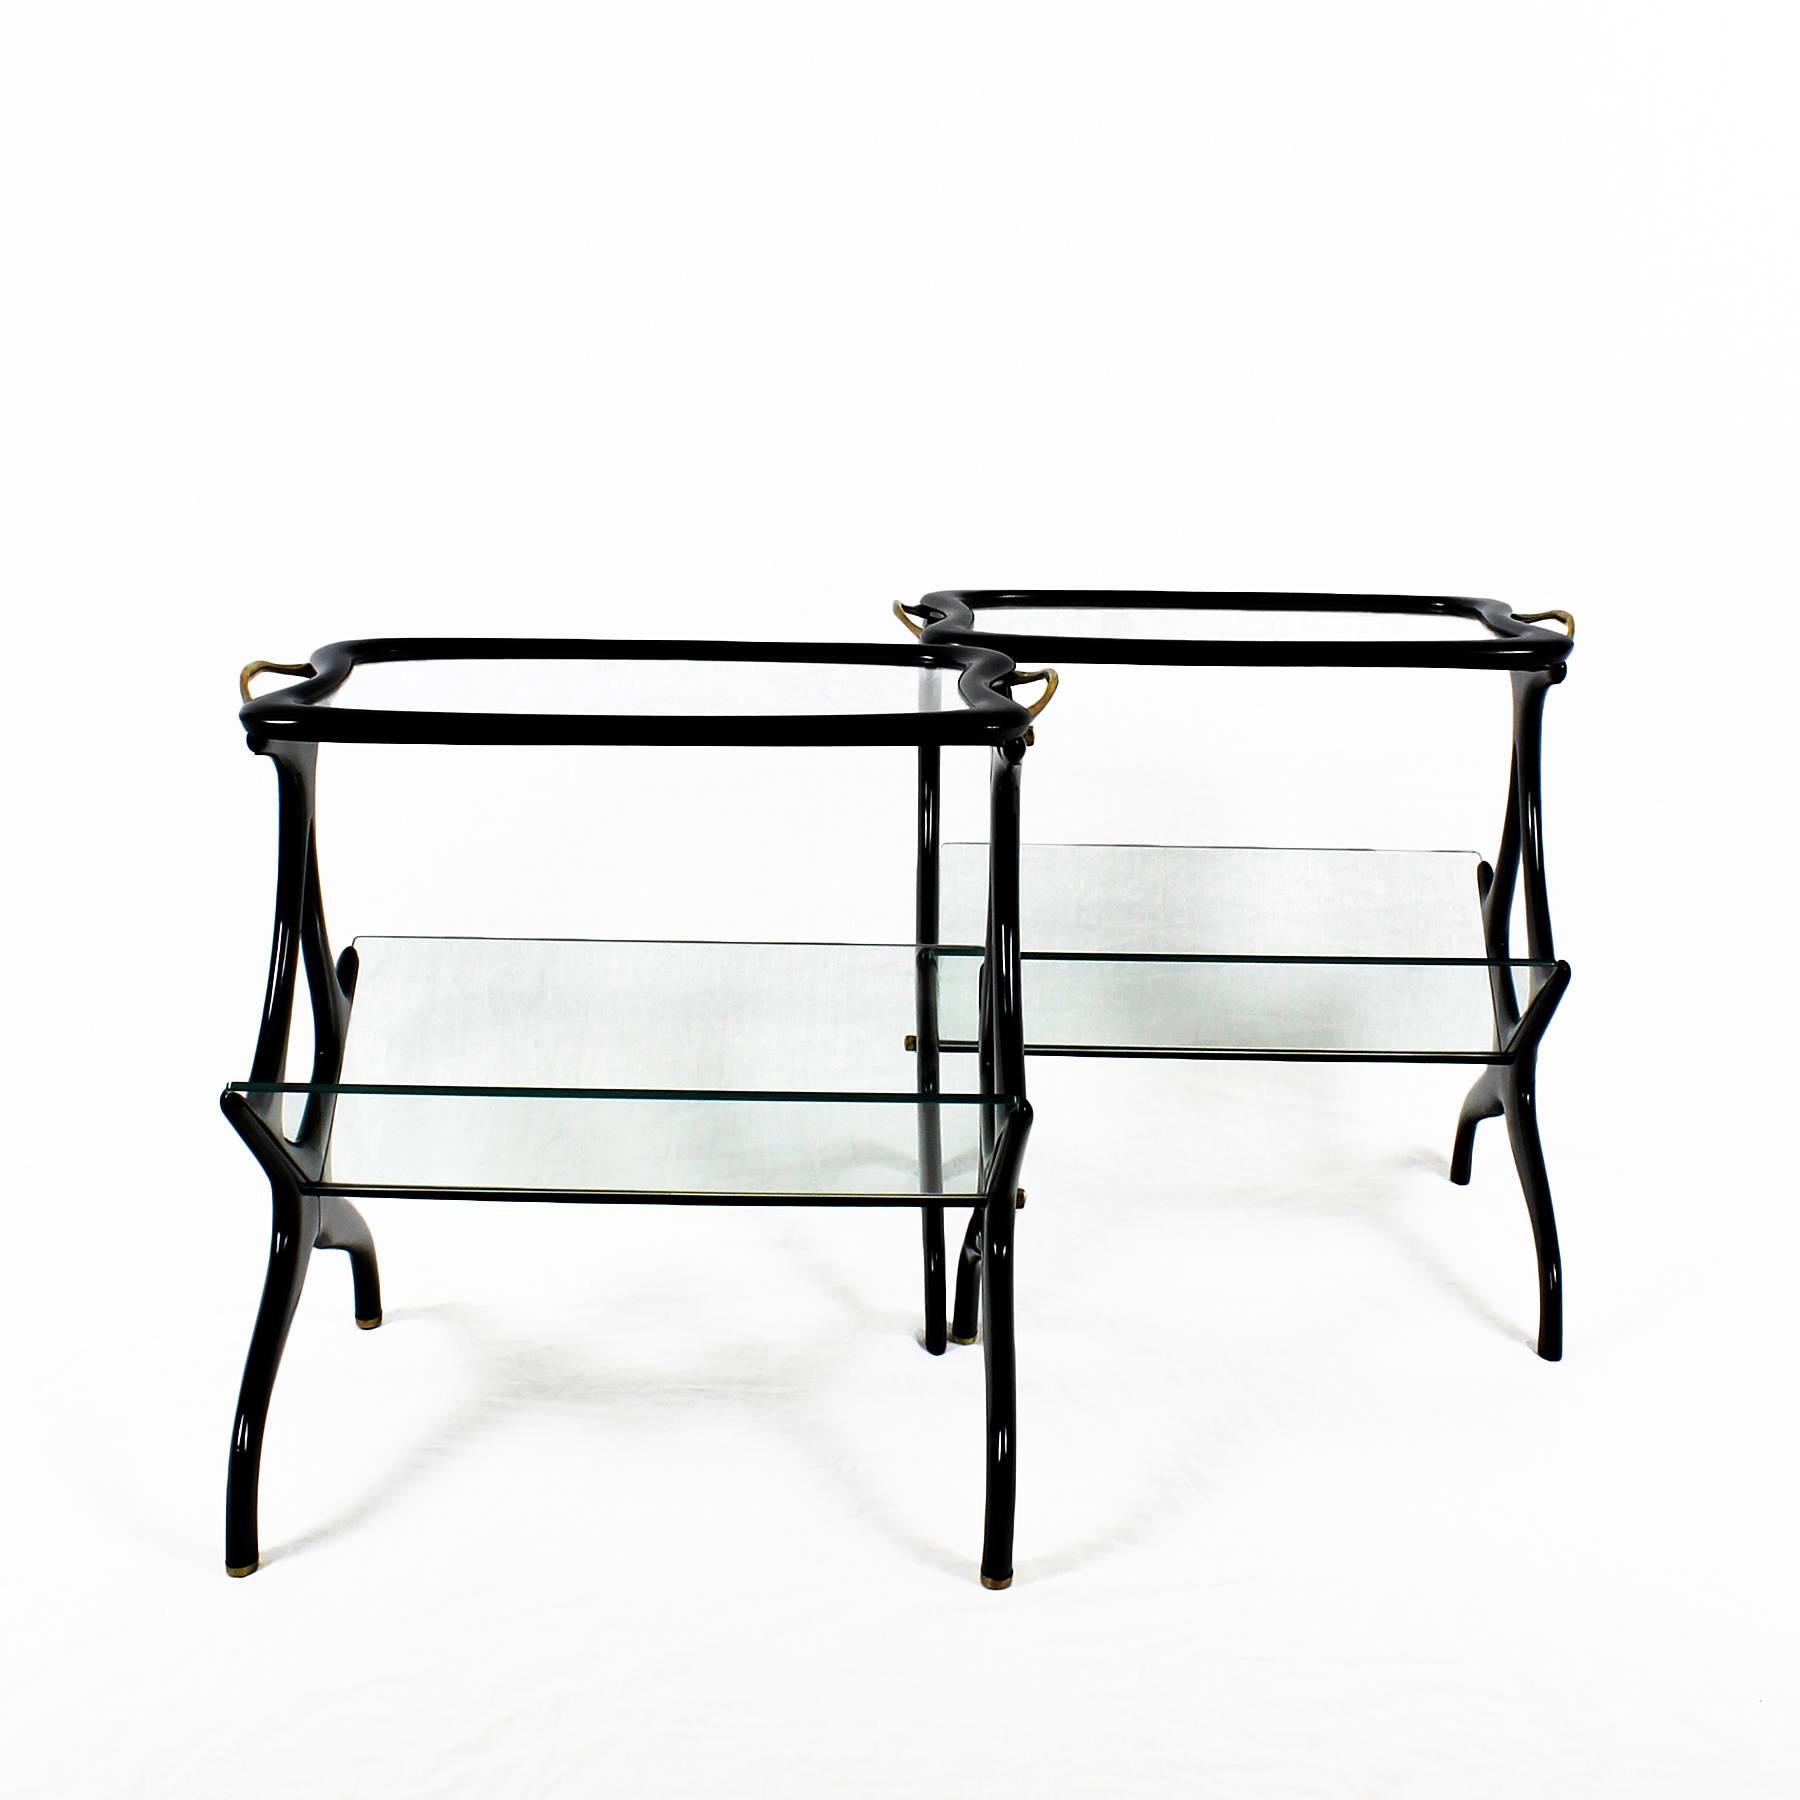 Two rare small tables-magazine rack, stained beech wood, french polish and glass. Brass handles and hardware, polished brass feet (only one of the tables).
Design: Cesare Lacca,

Italy, circa 1950

Unite price.